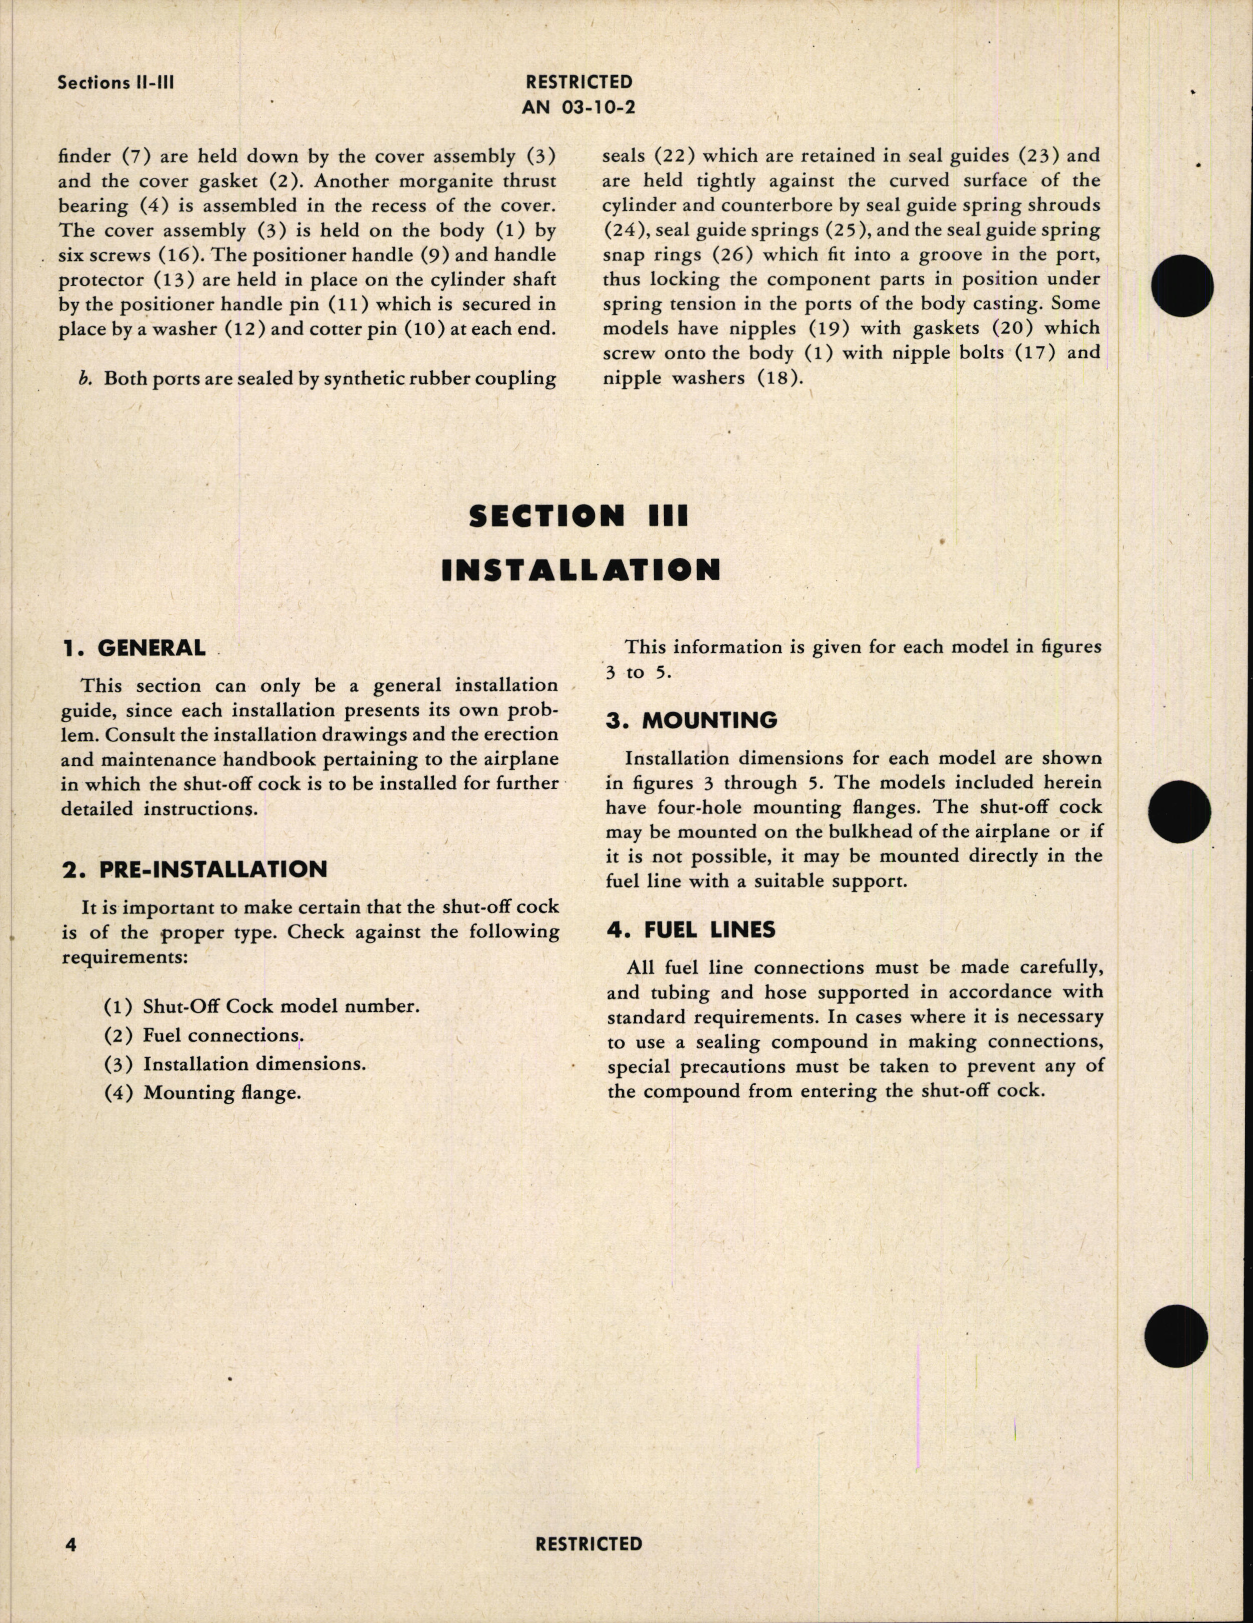 Sample page 8 from AirCorps Library document: Handbook of Instructions with Parts Catalog for Shut-Off Valves